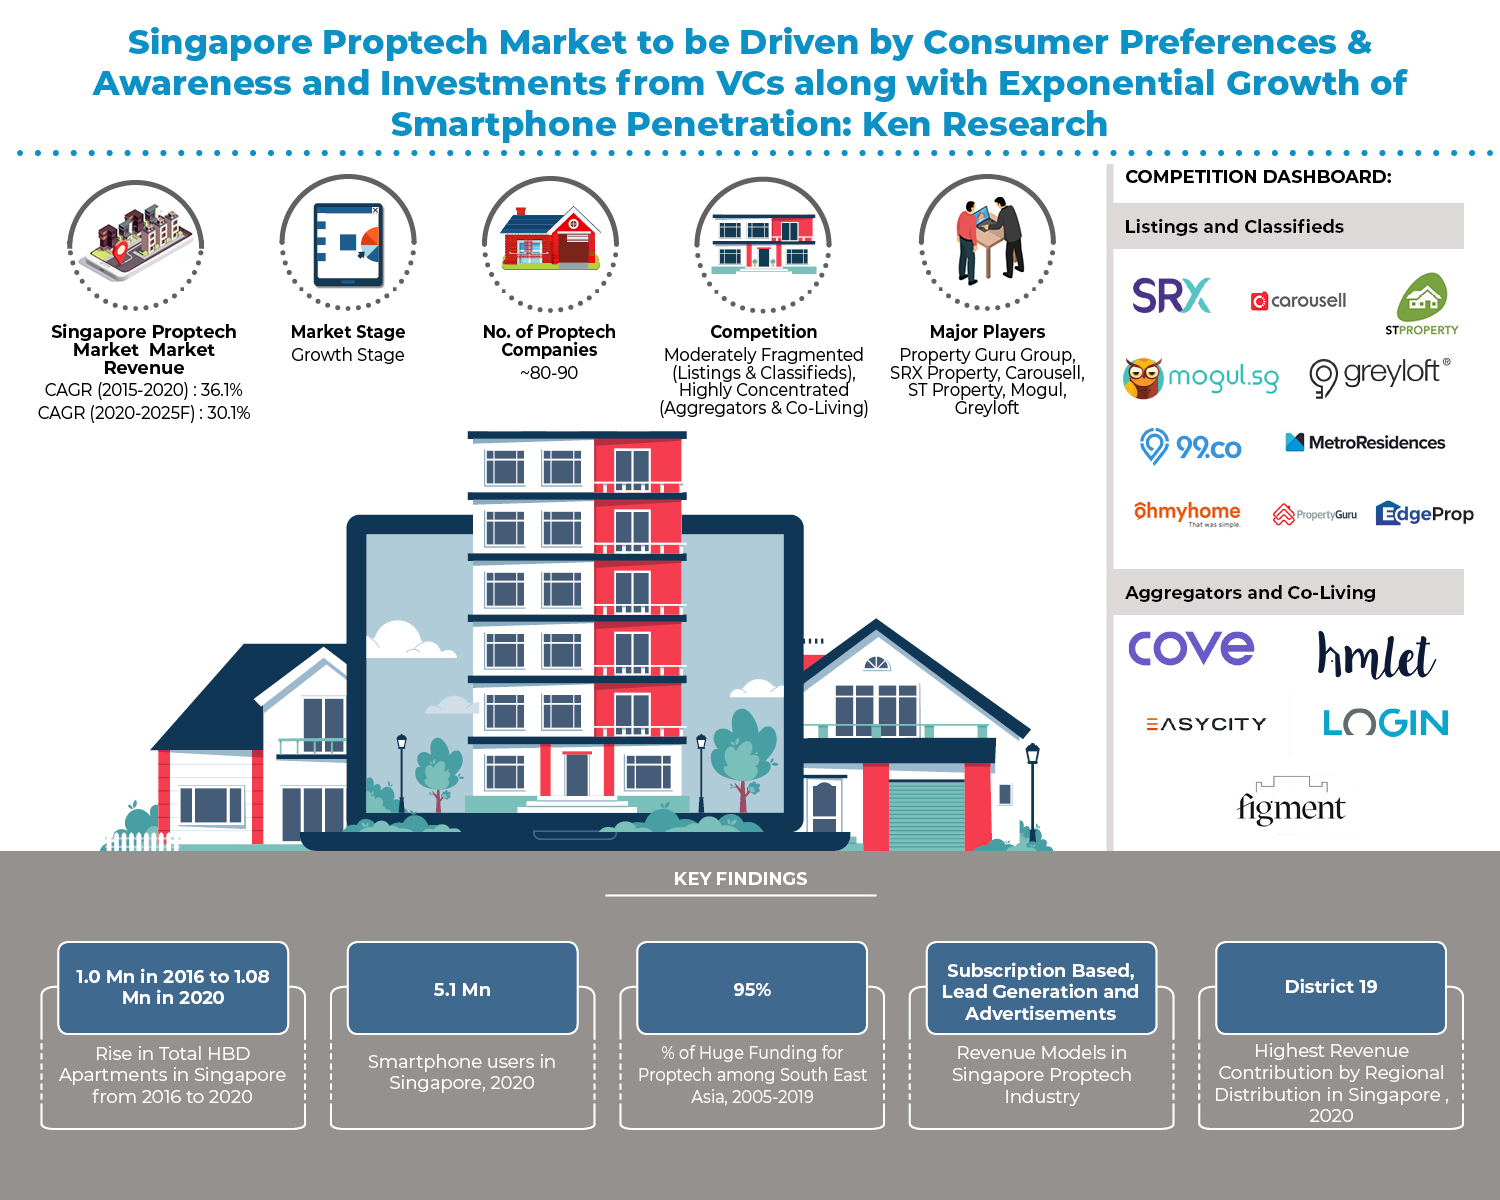 Proptech Market in Singapore